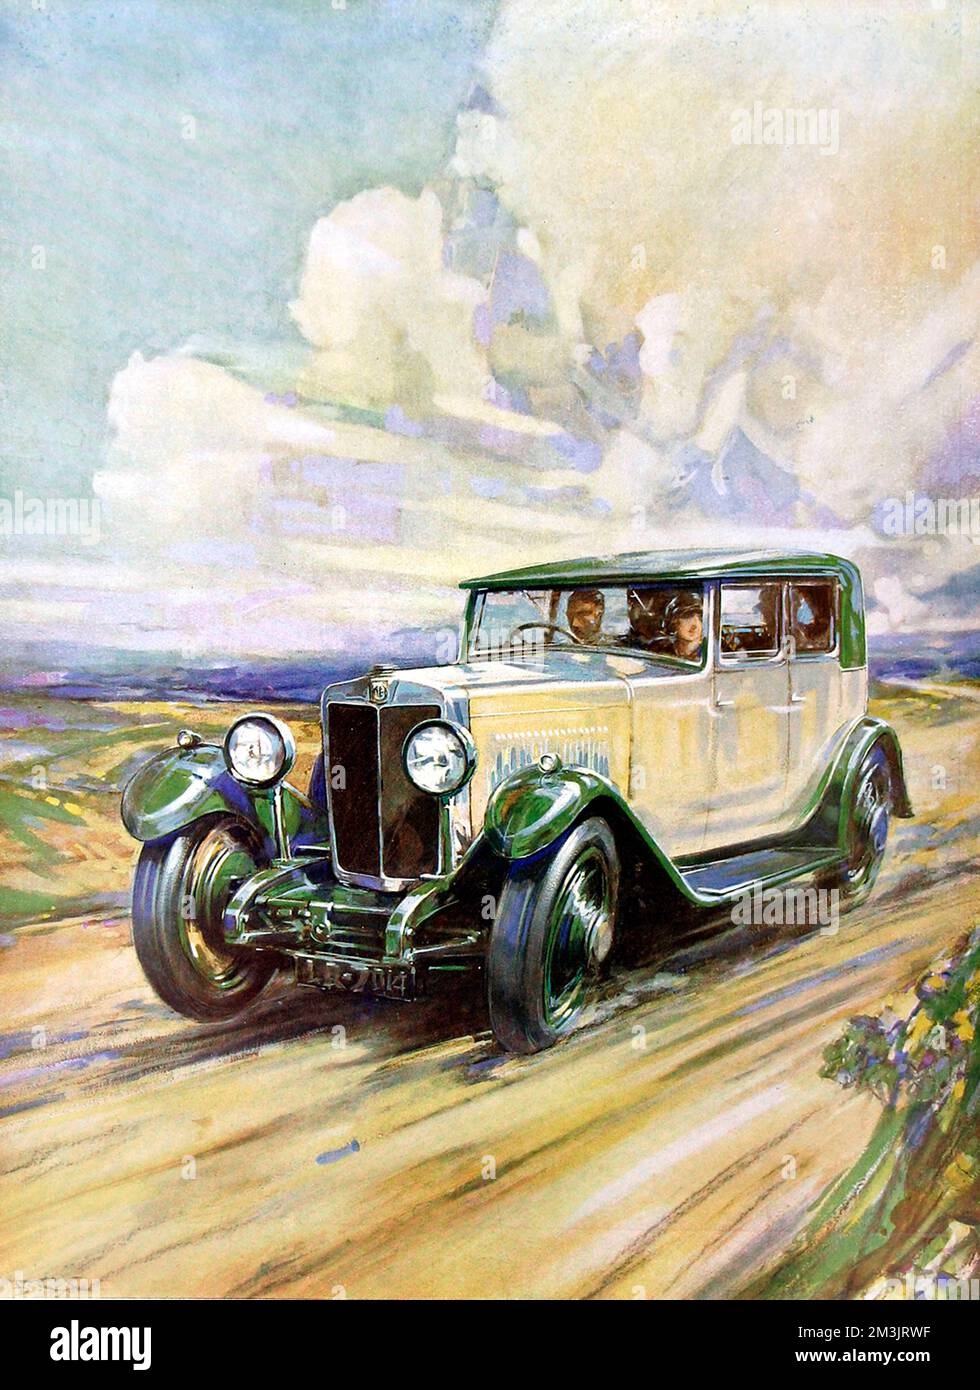 An illustration captioned 'Morning on the Moors' showing an M.G. Six Sports car, which at the time was one of the fastest standard sports cars available at a price of 510.     Date: 1929 December Stock Photo